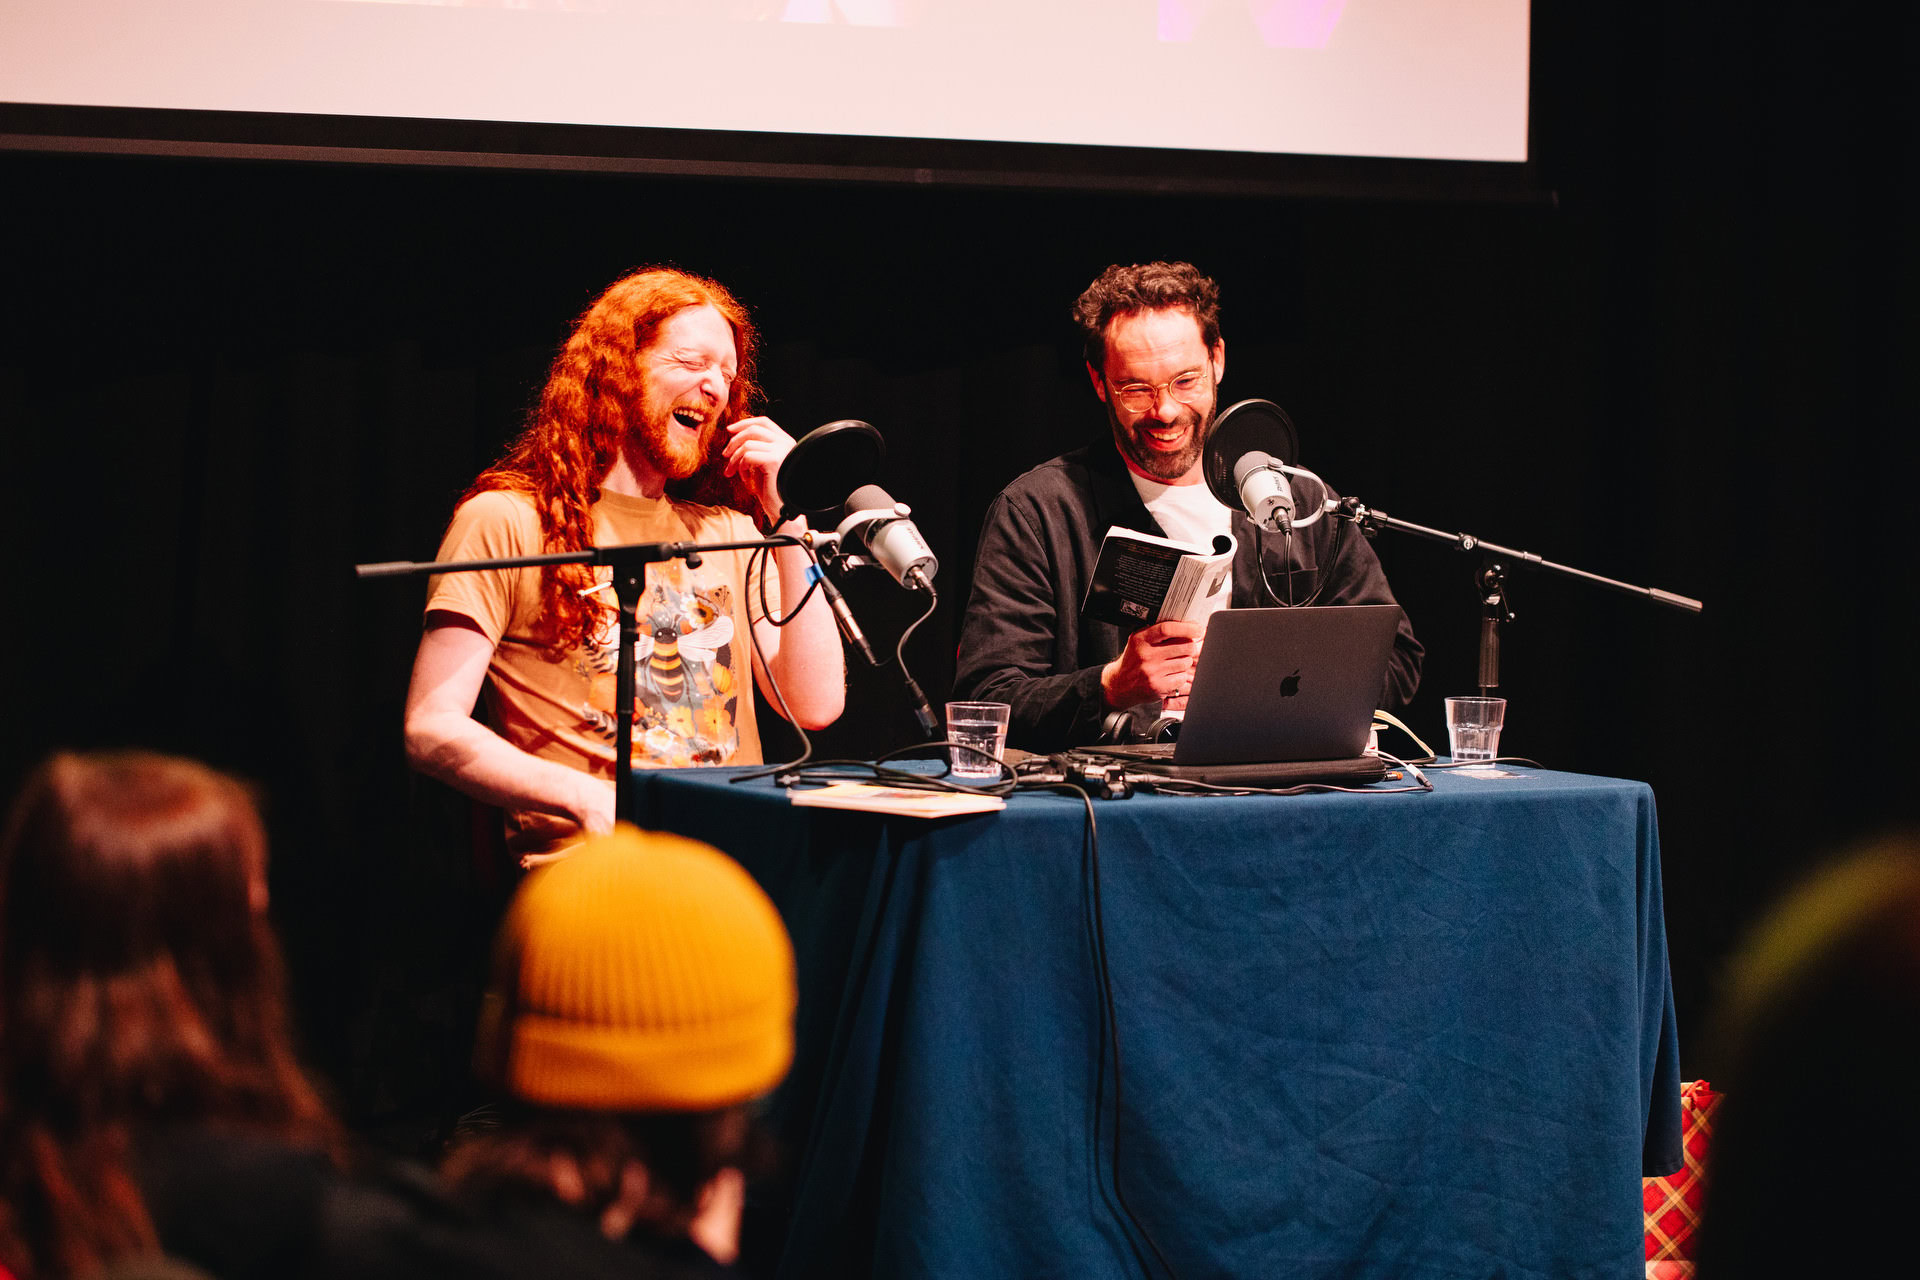 St Audio Podcast Festival Oxford // Lucy Judson Photography